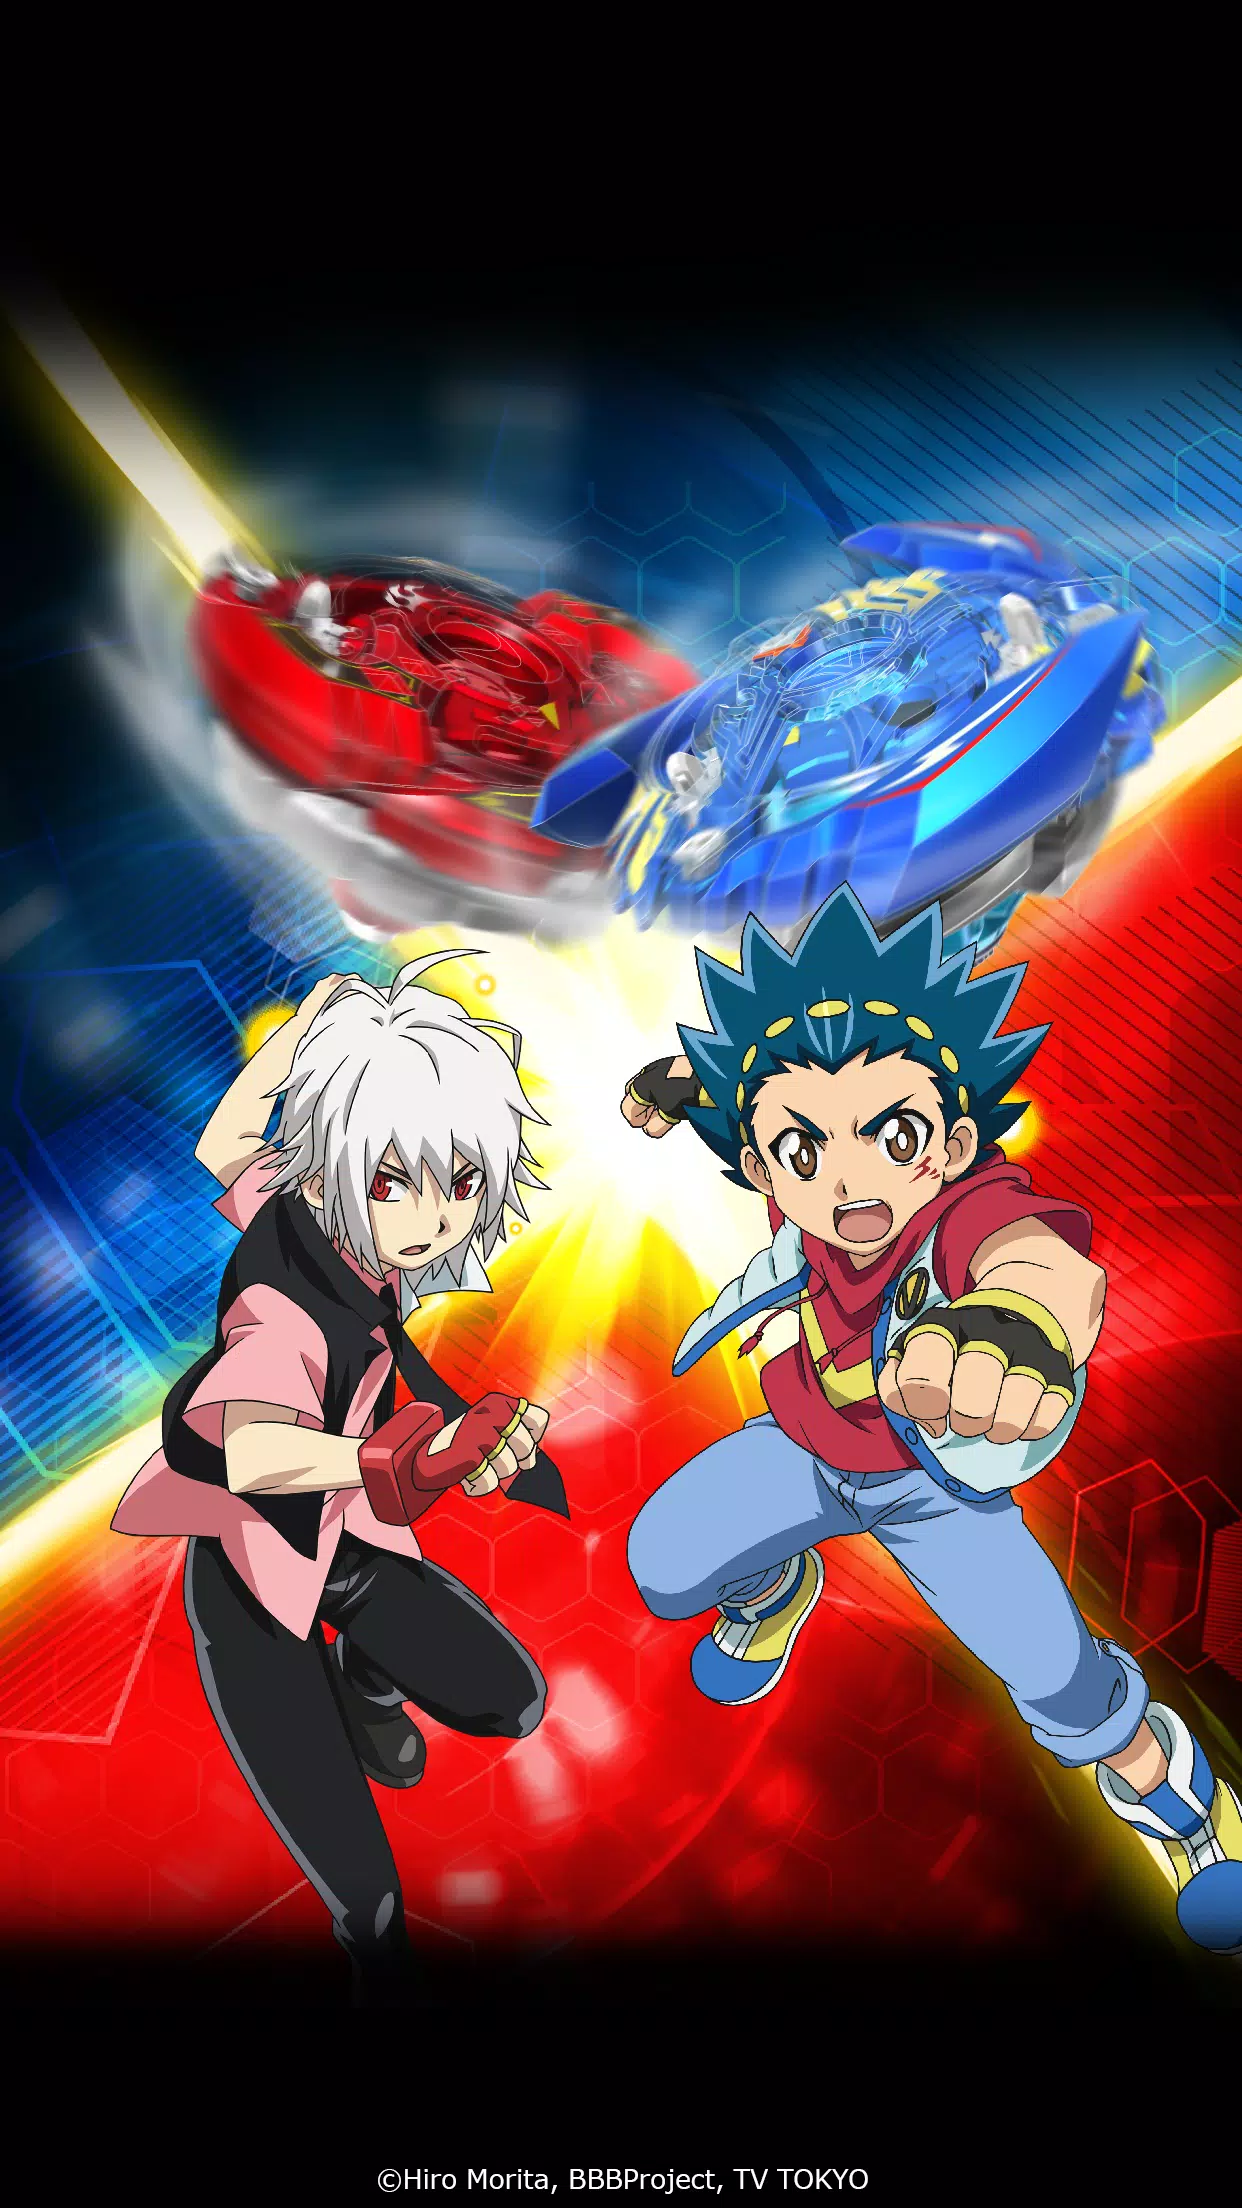 Beyblade Burst Rivals for Android - APK Download